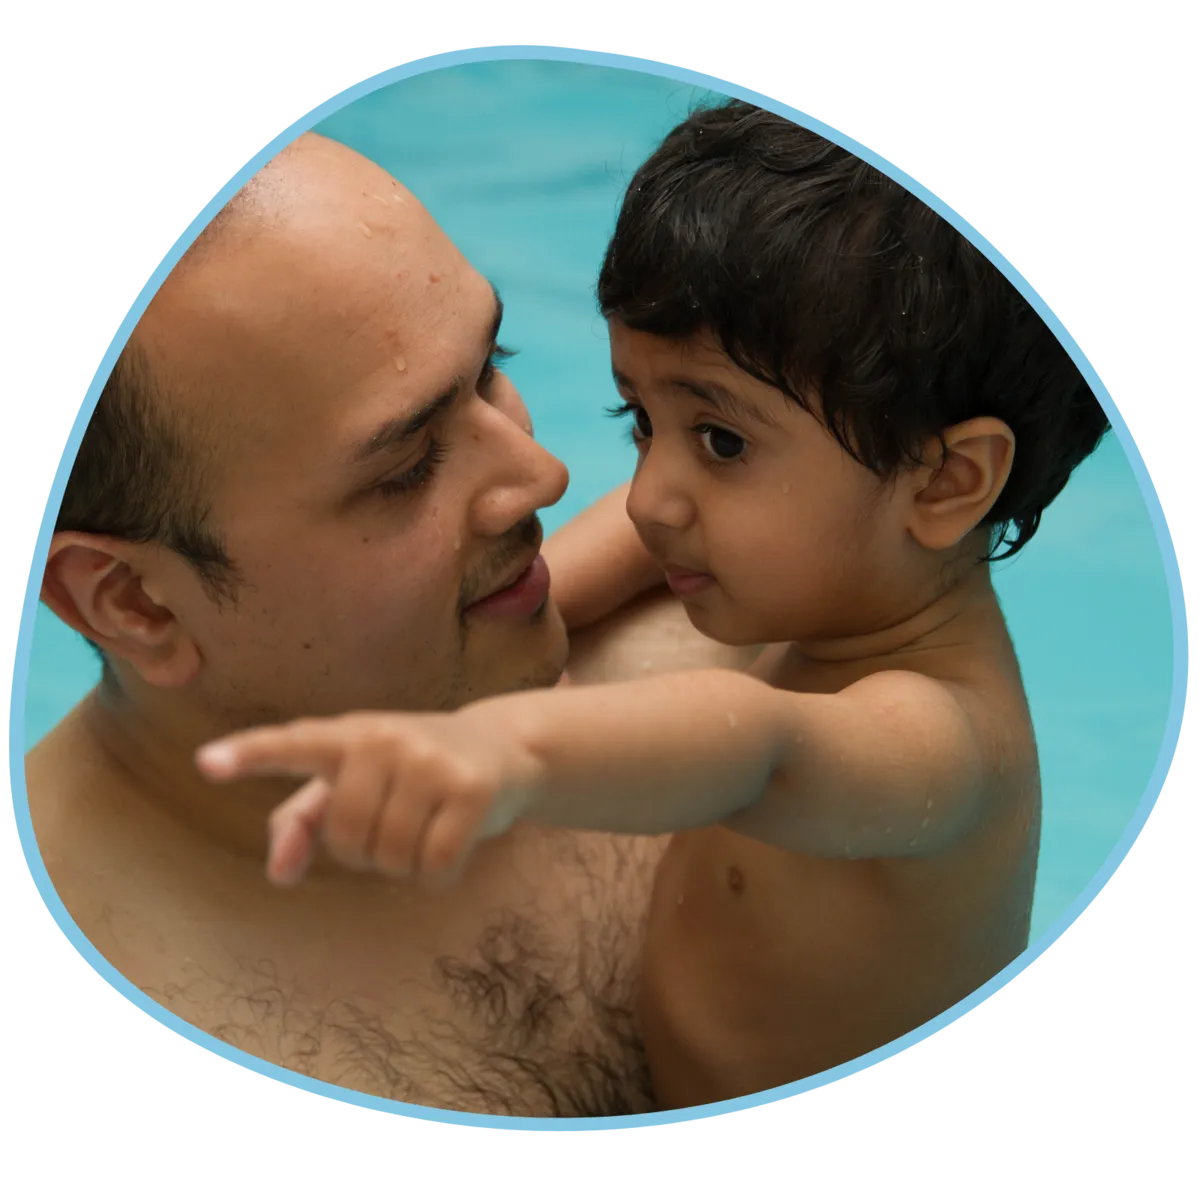 A dad and his child are in a swimming pool and the child is pointing at something